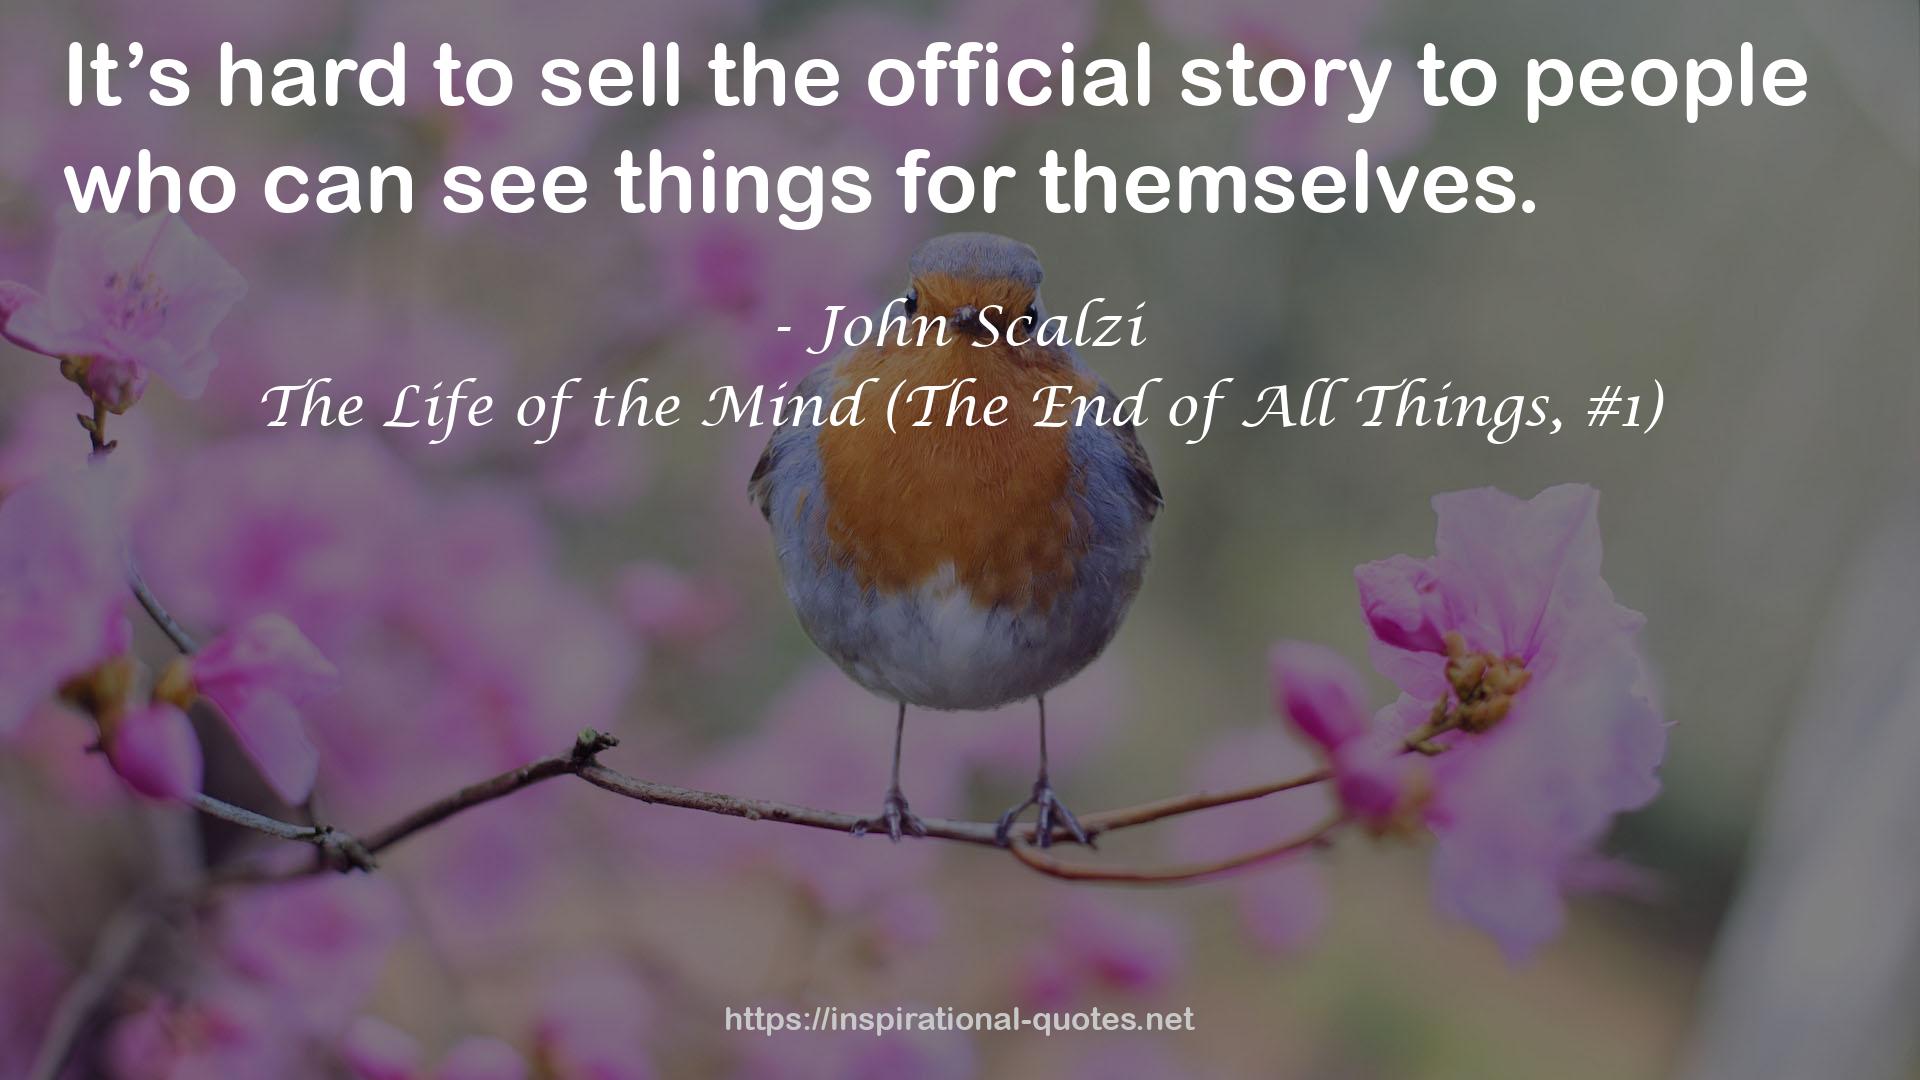 The Life of the Mind (The End of All Things, #1) QUOTES